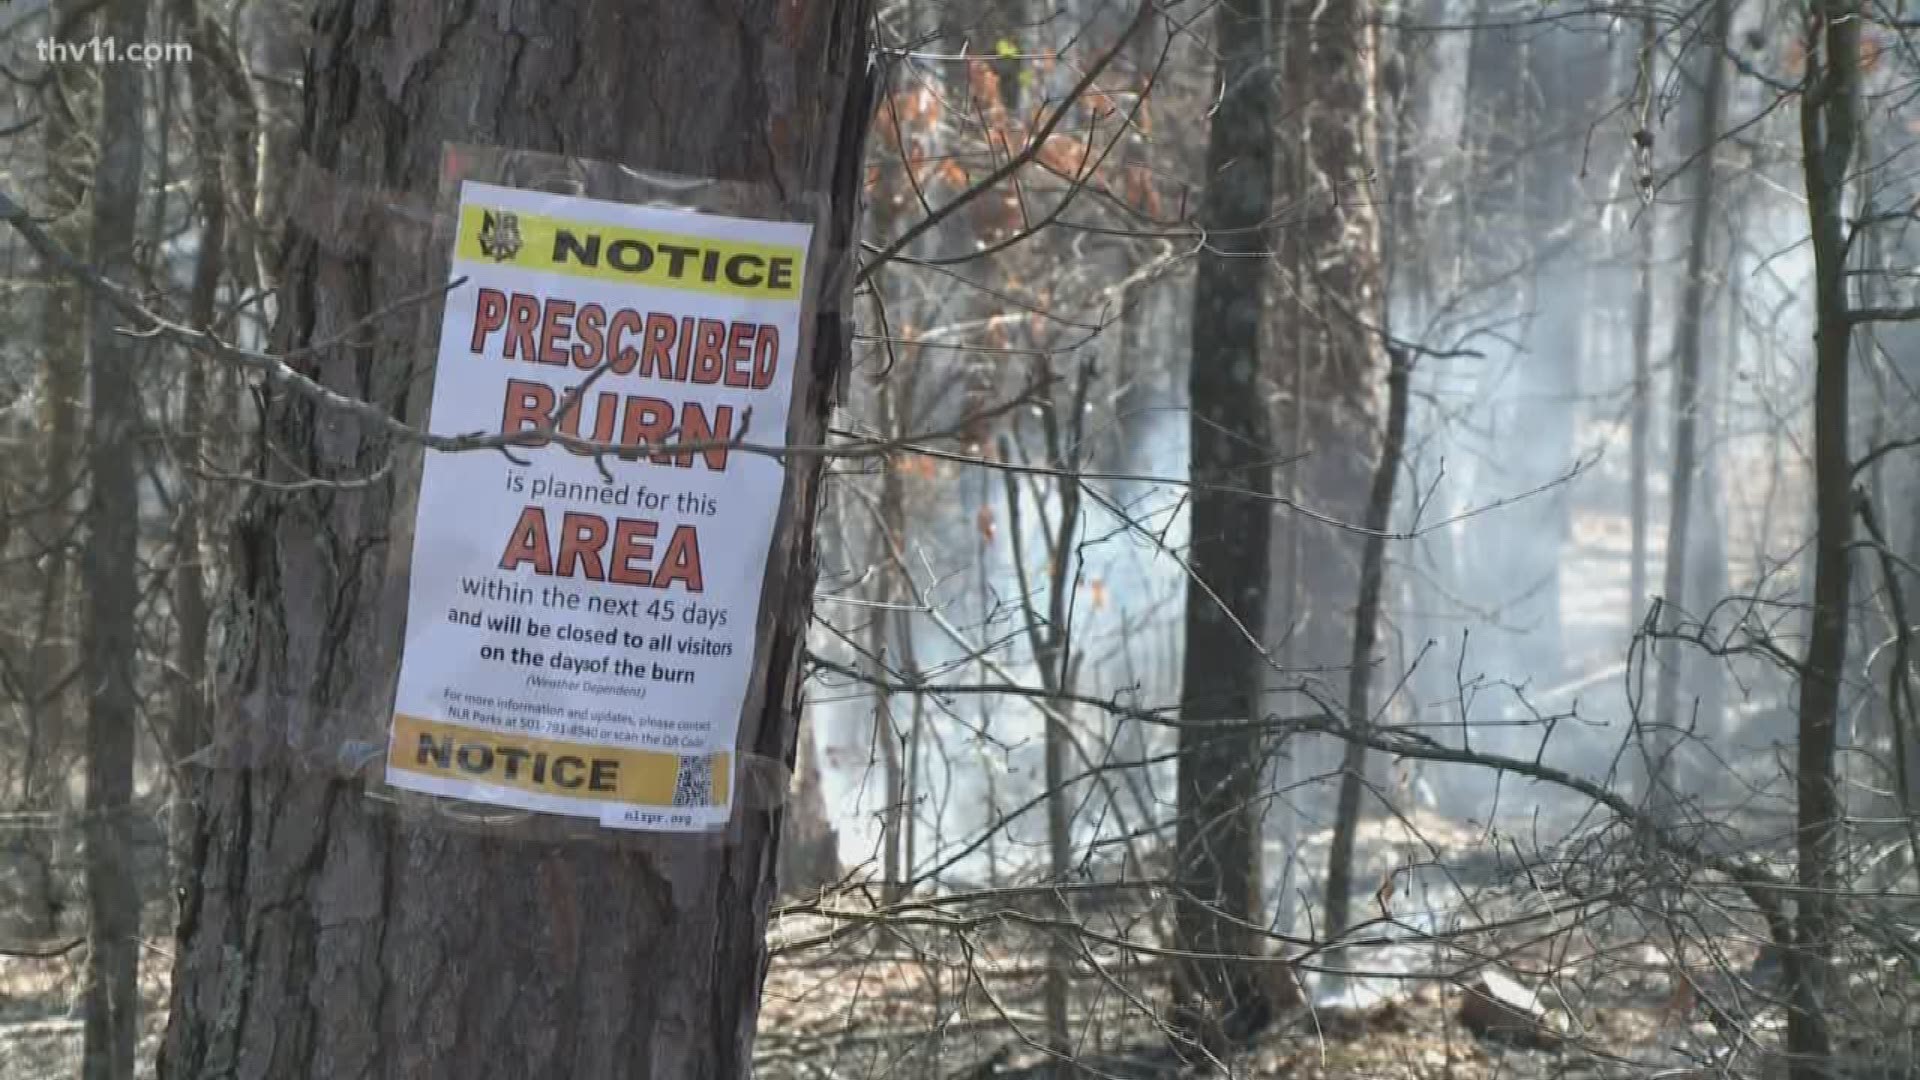 You usually wouldn't equate burn bans with prescribed burns, but that's exactly what some counties are doing to cut down the risk of wildfire.